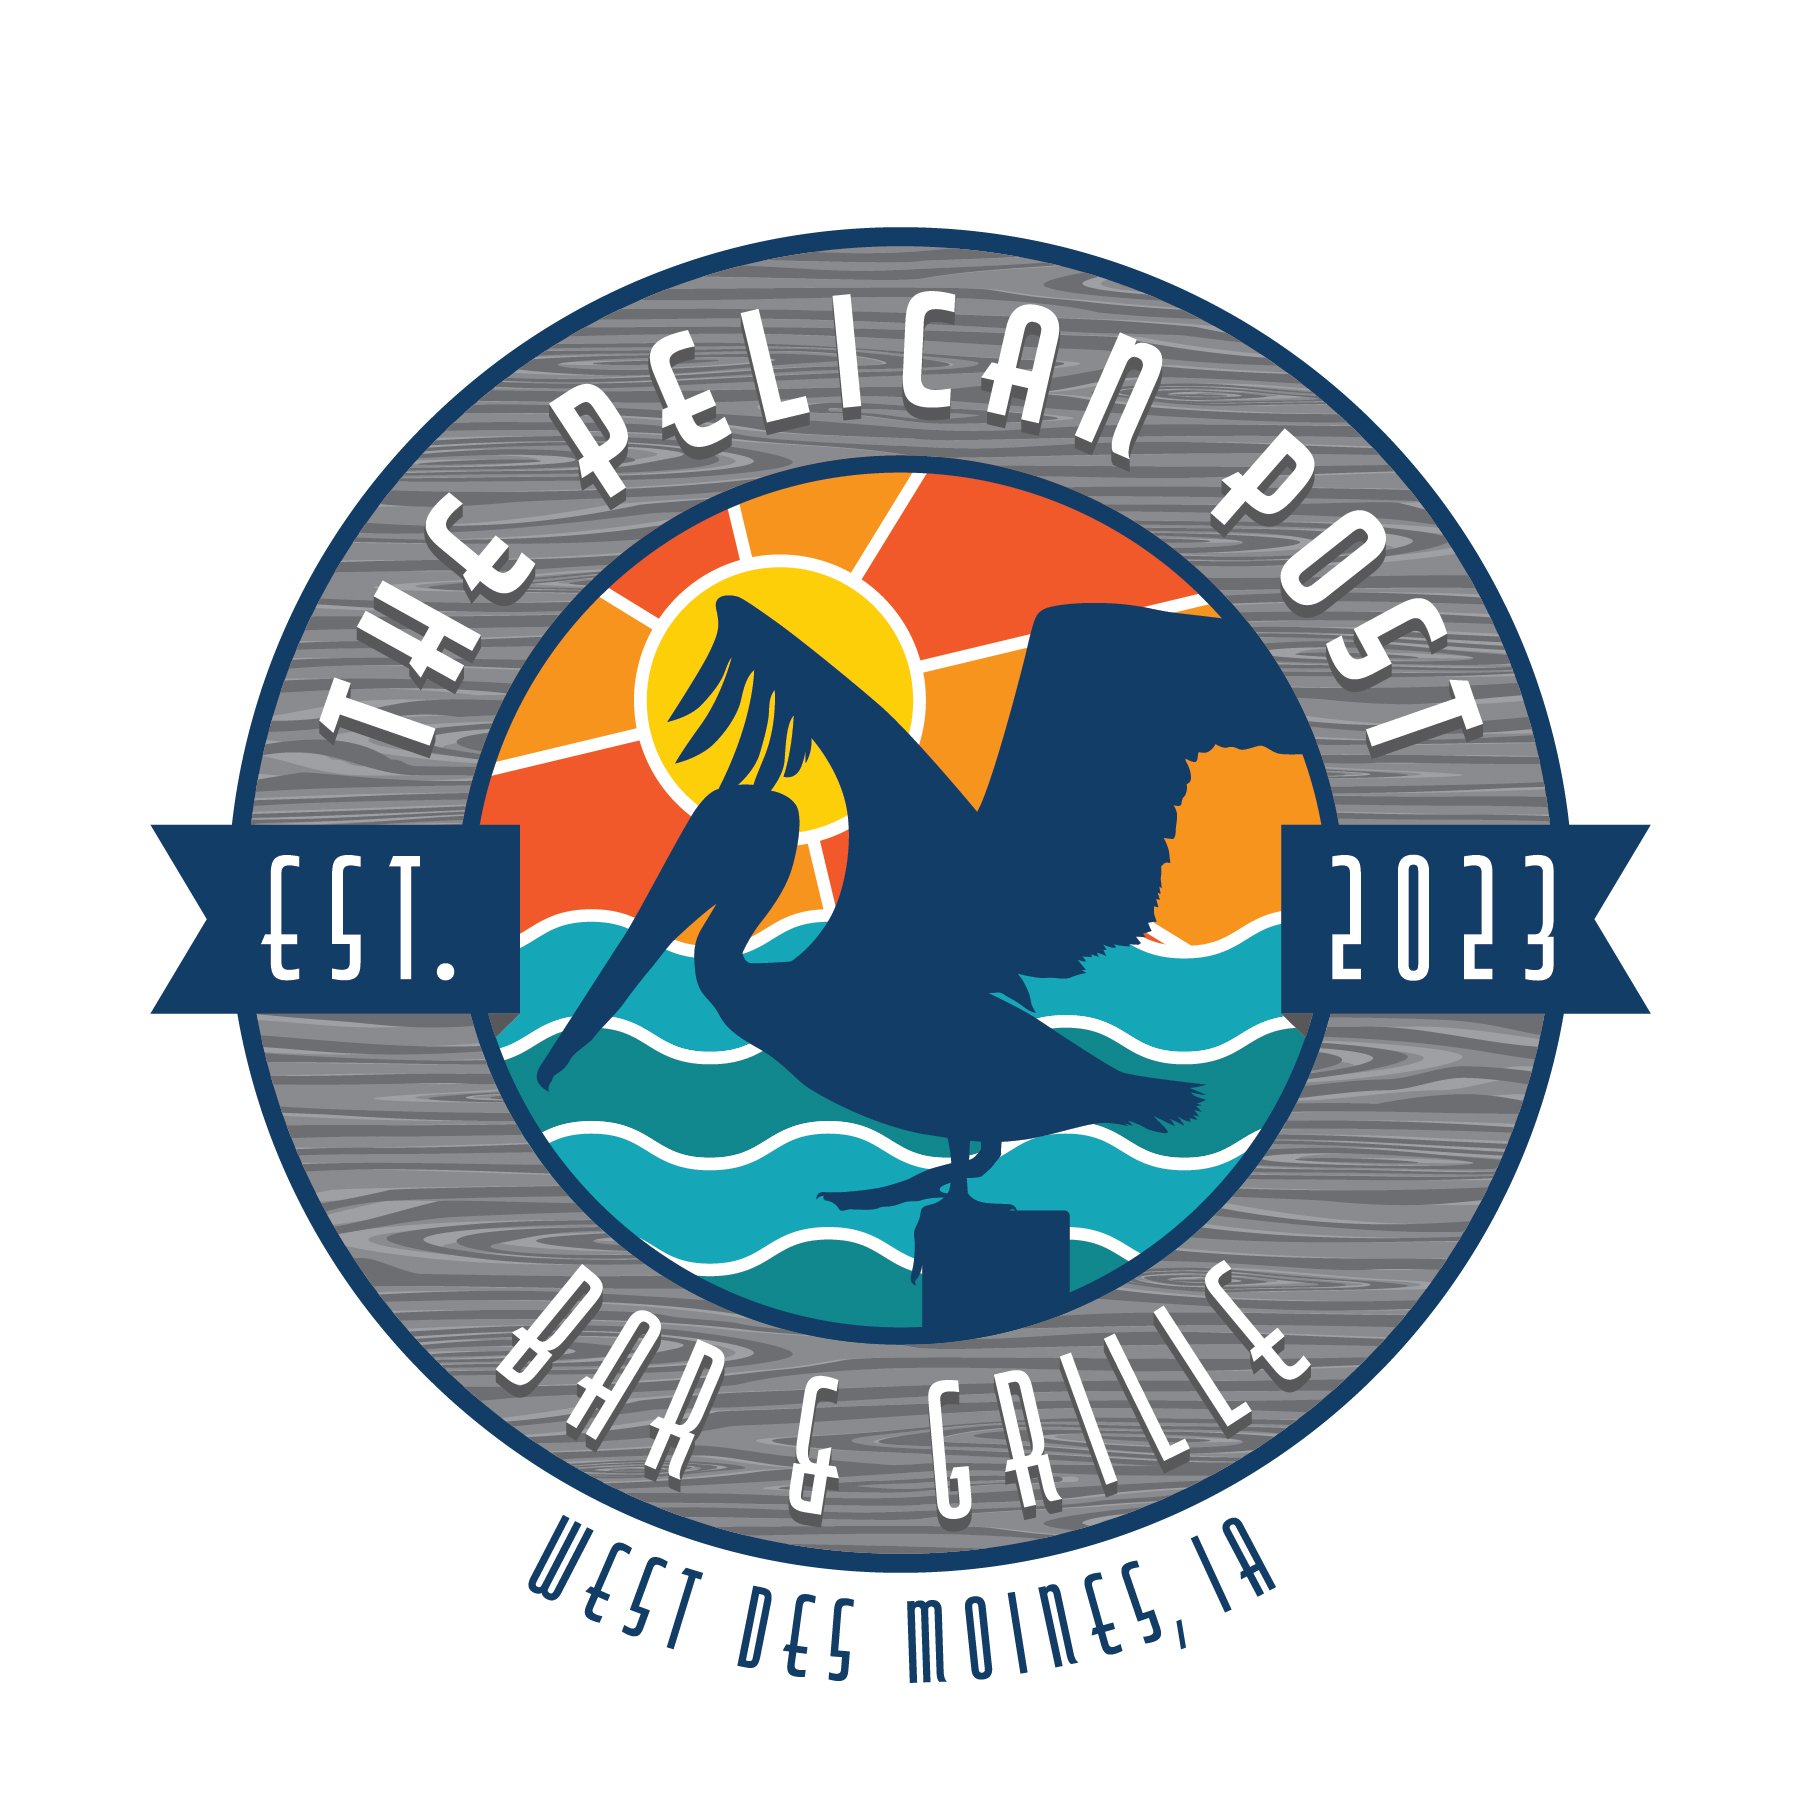 The Pelican Post Bar & Grille 